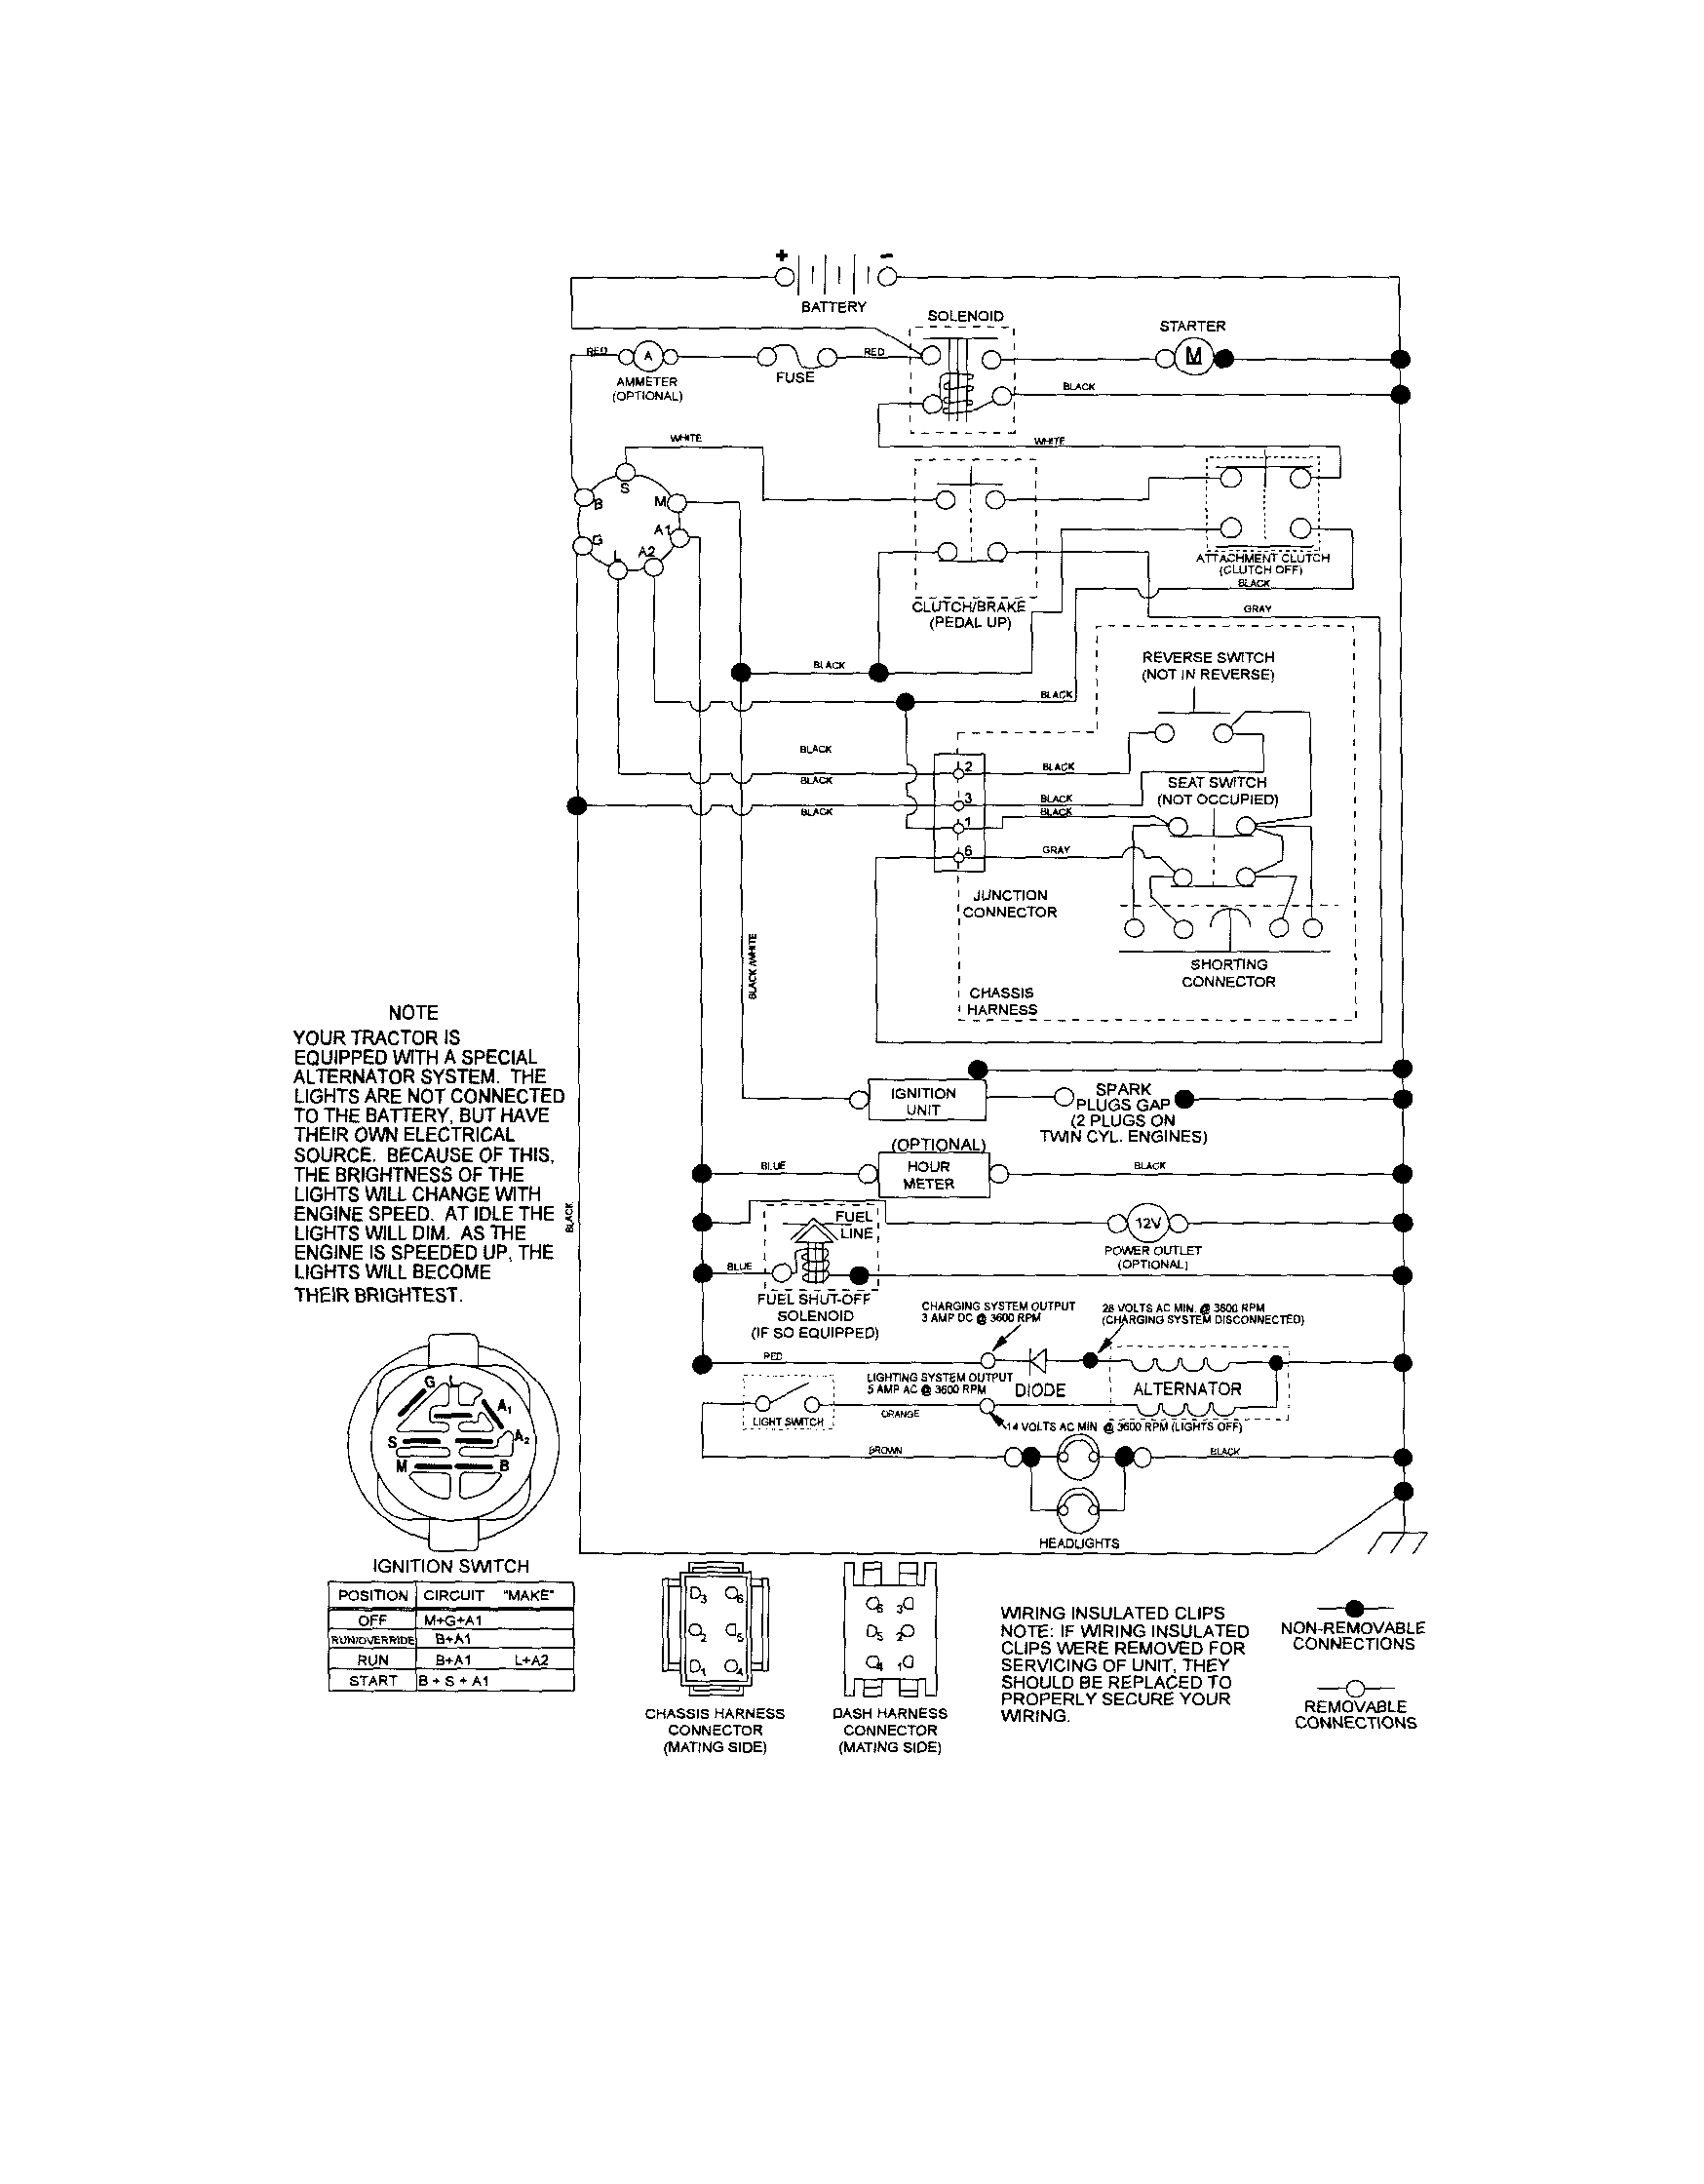 Safety switches and wiring schematic for a craftsman, electric pto